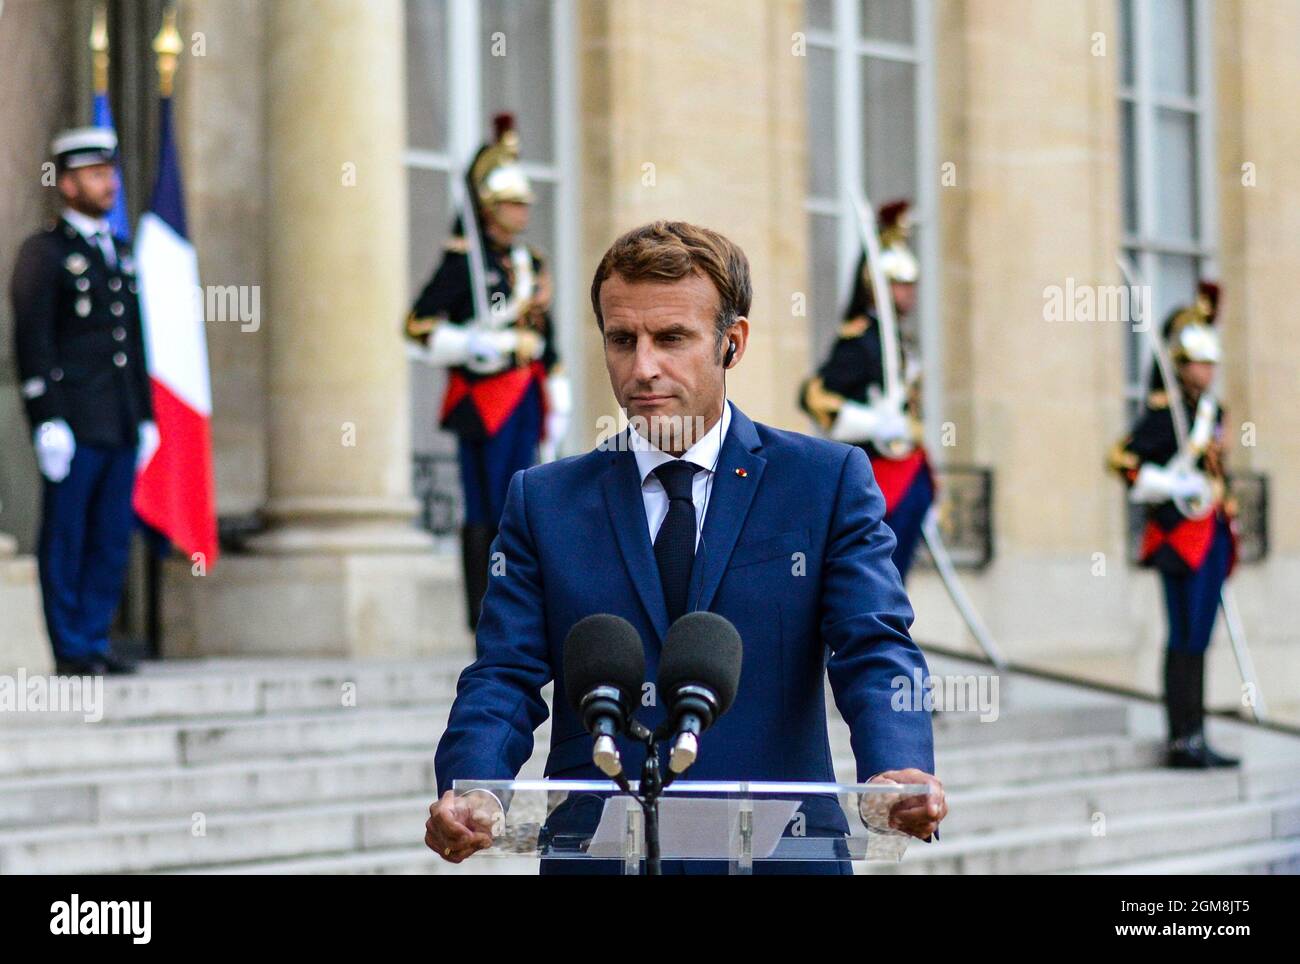 PARIS, FRANCE, 16 SEPTEMBER 2021. France’s President Emmanuel Macron speaks to the press as he welcomes Germany’s Chancellor Angela Merkel prior to a working dinner at the Elysee Palace. Credit: Amaury Paul/Medialys Images/Alamy Live News Stock Photo